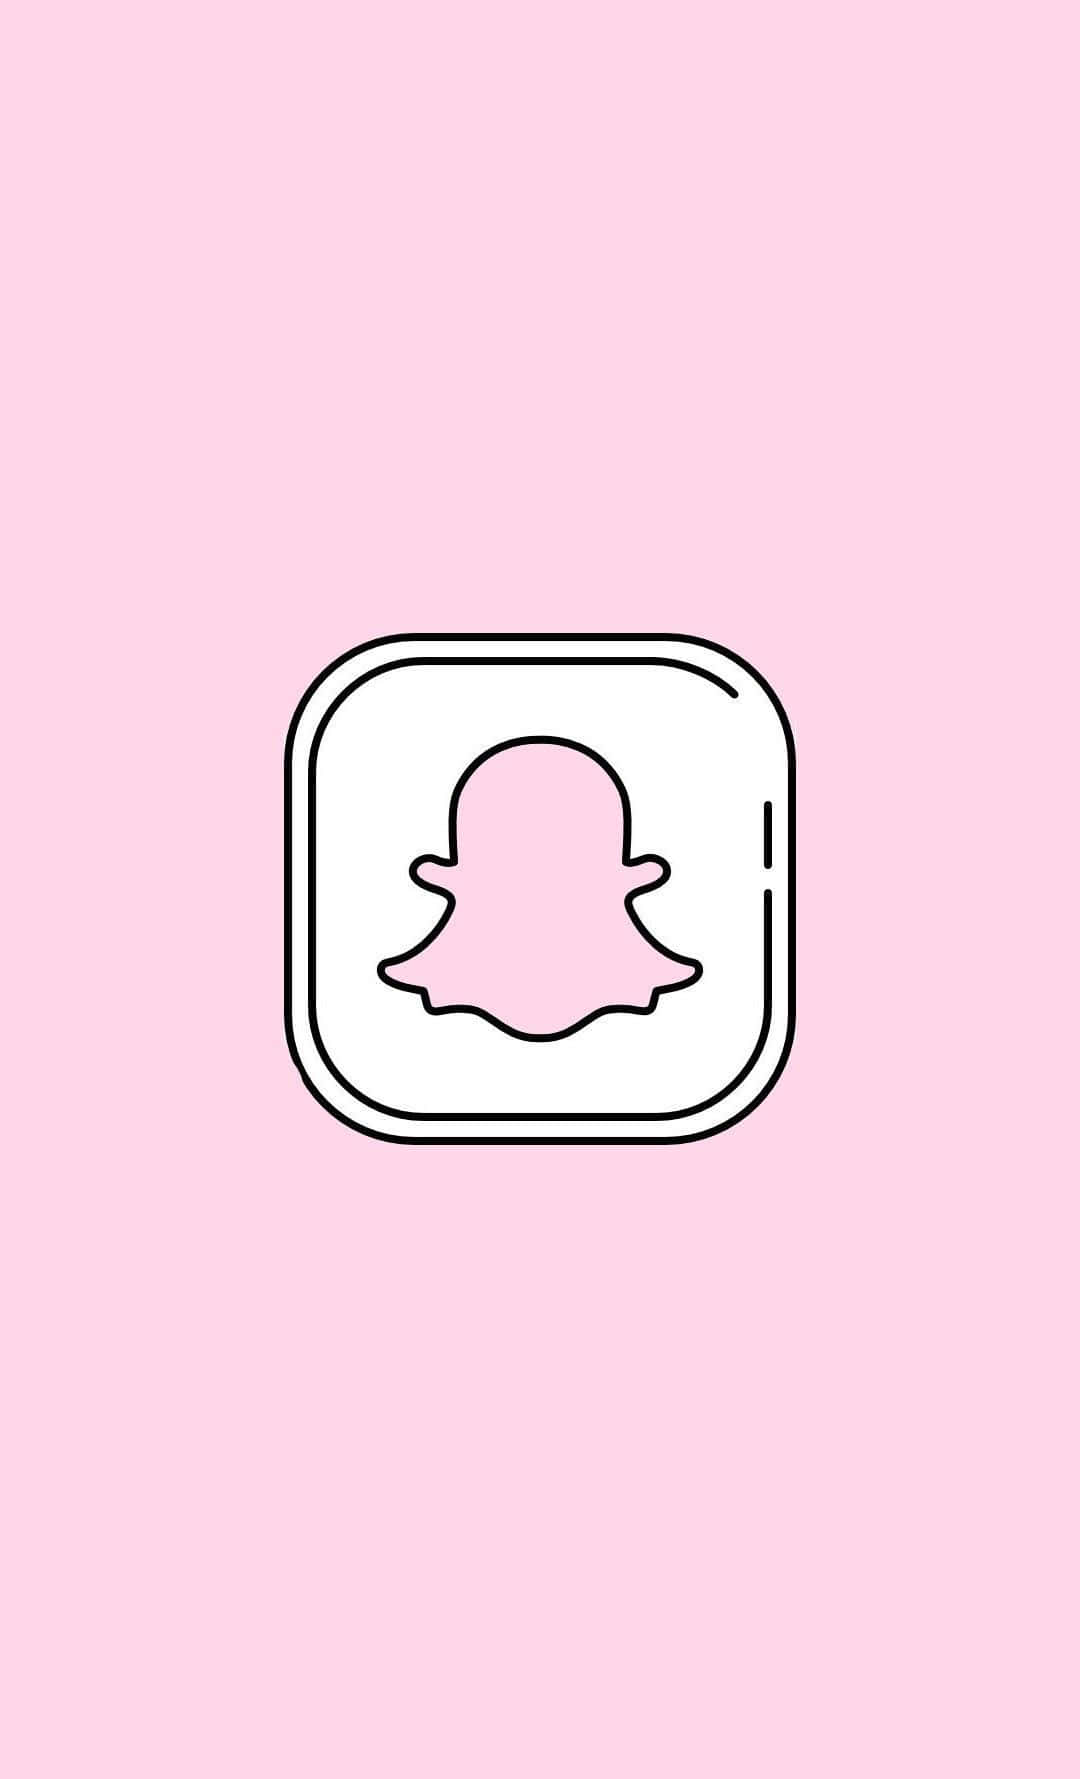 Upgrade your Snapchat look with this cool background image!